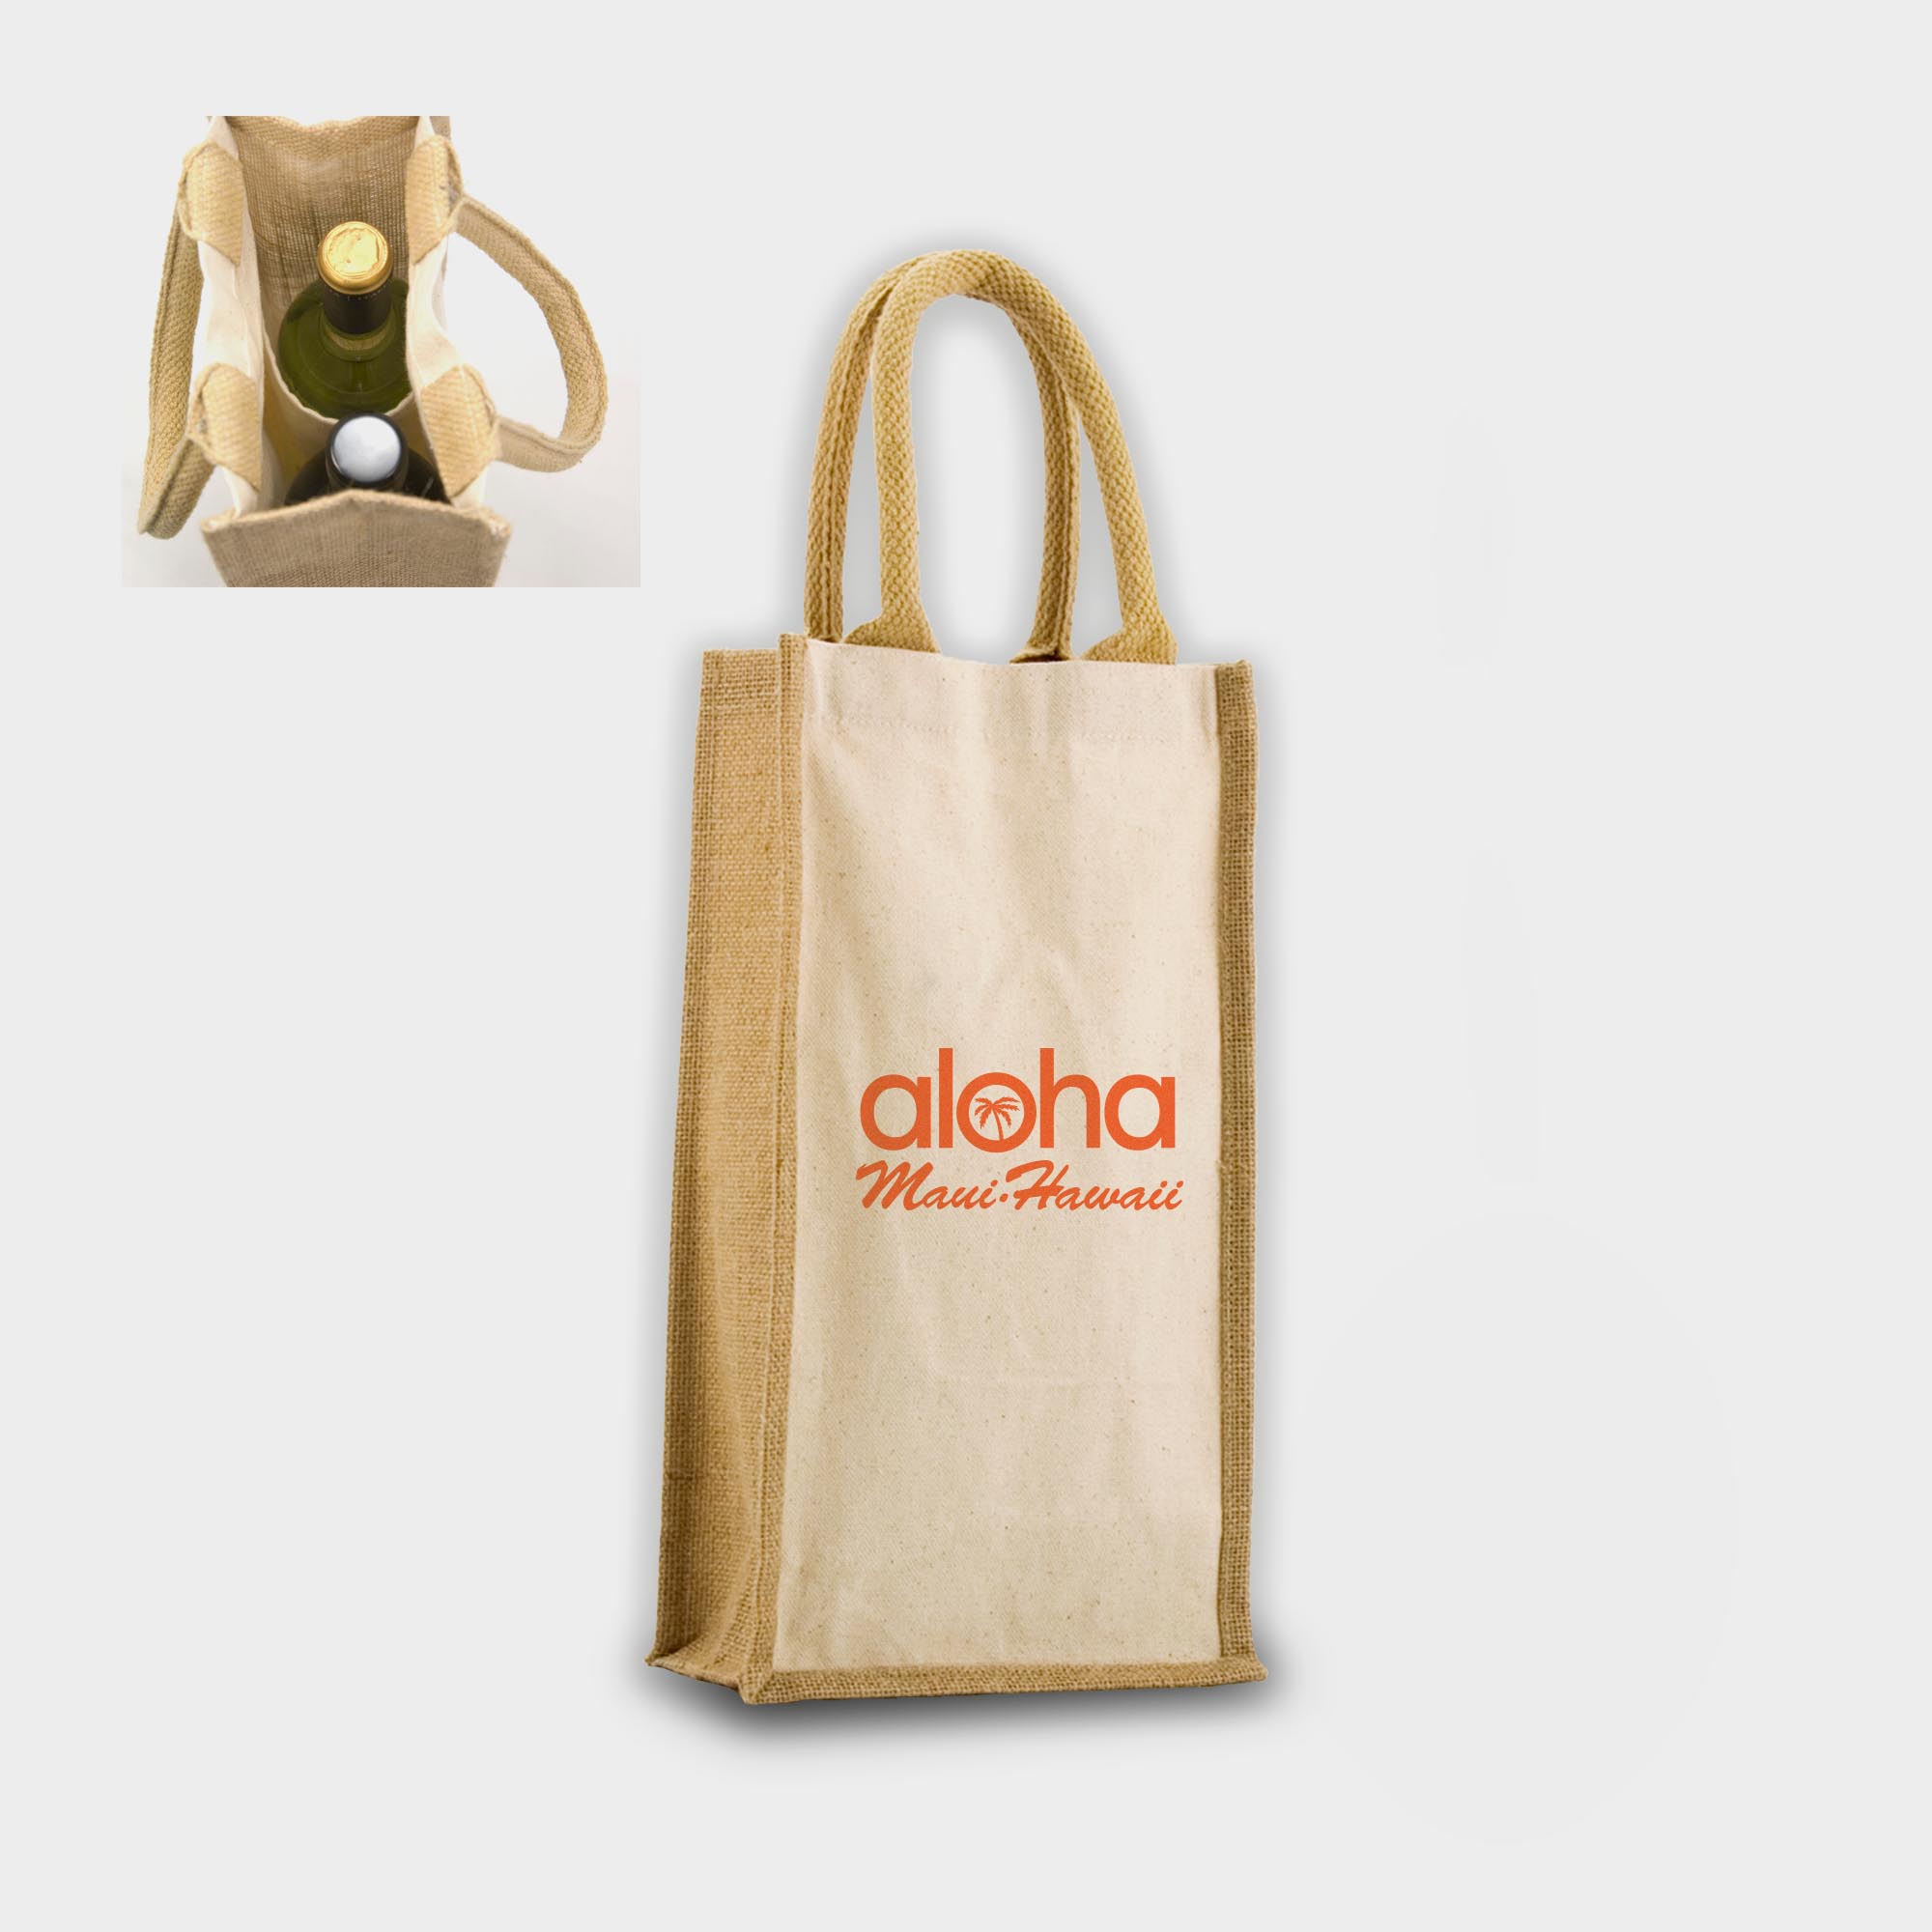 The Green & Good Salisbury Bag. A practical gift bag for bottles, it is made from a mix of unbleached cotton and sustainable jute. Comes with jute handles and internal wine bottle holders. Ethically produced in India in an audited factory. 10oz / 280sm cotton + jute. Oekotex 100 Standard.